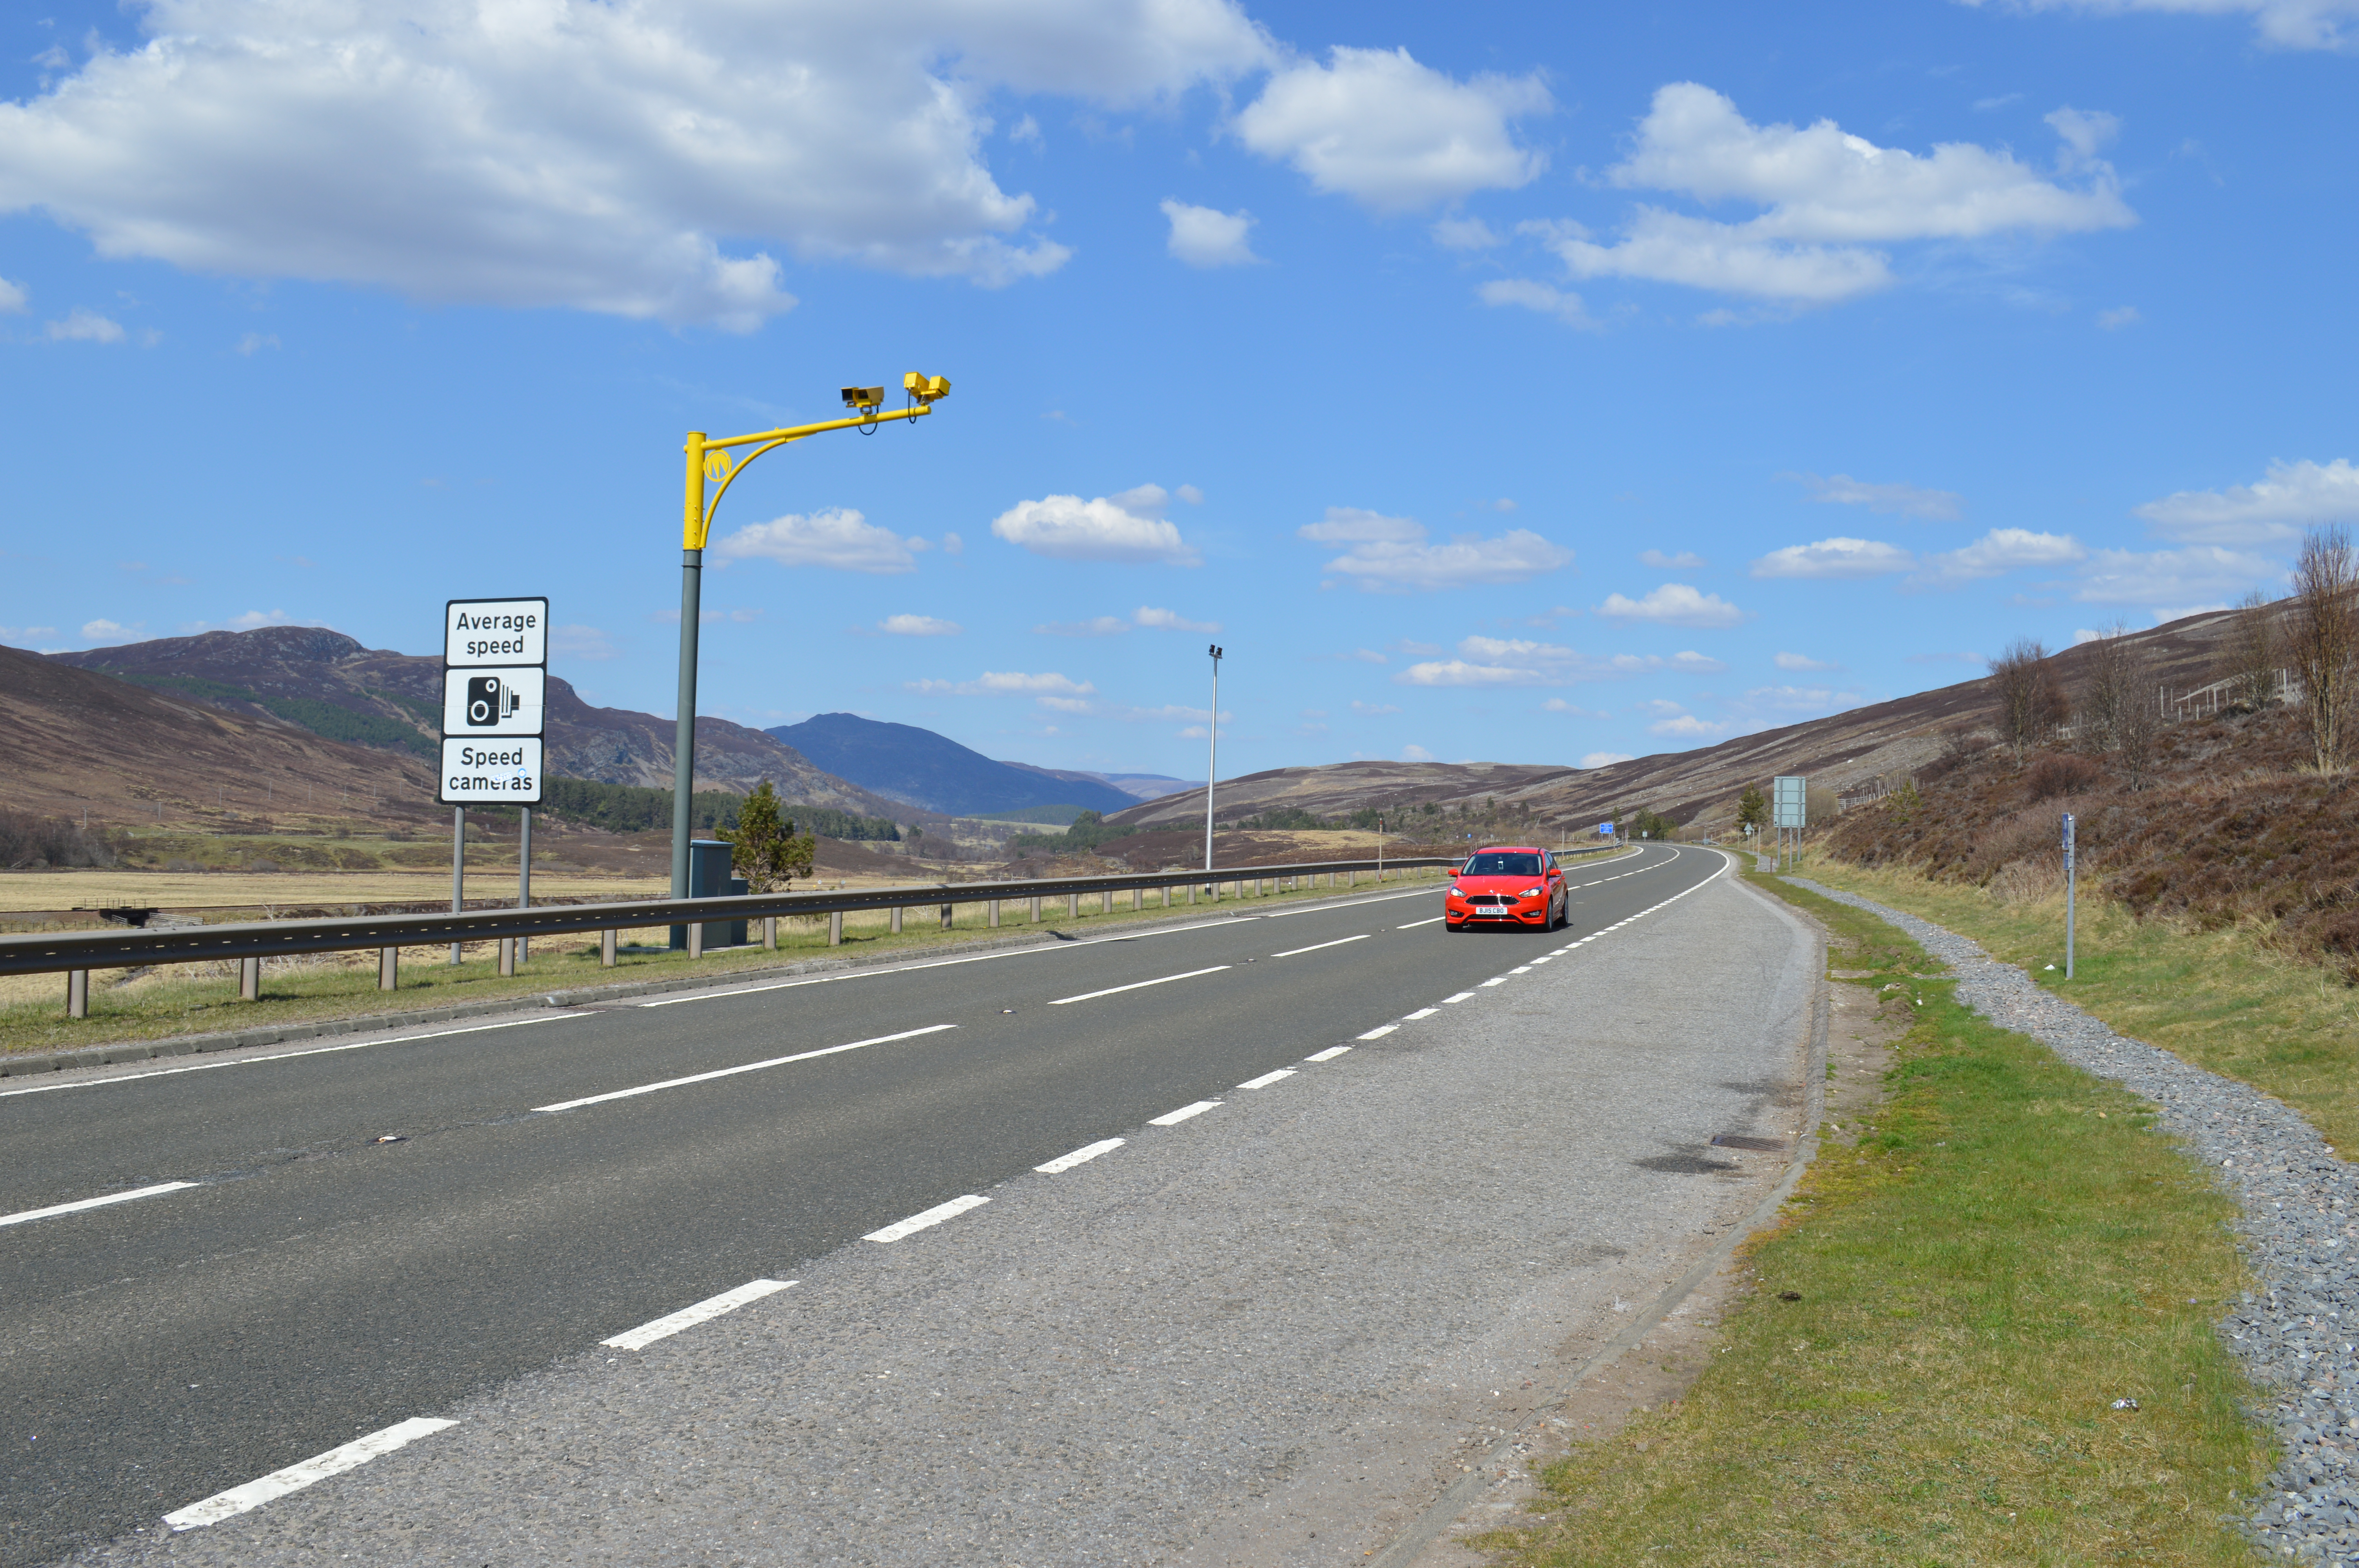 Average speed cameras are changing driver behaviour